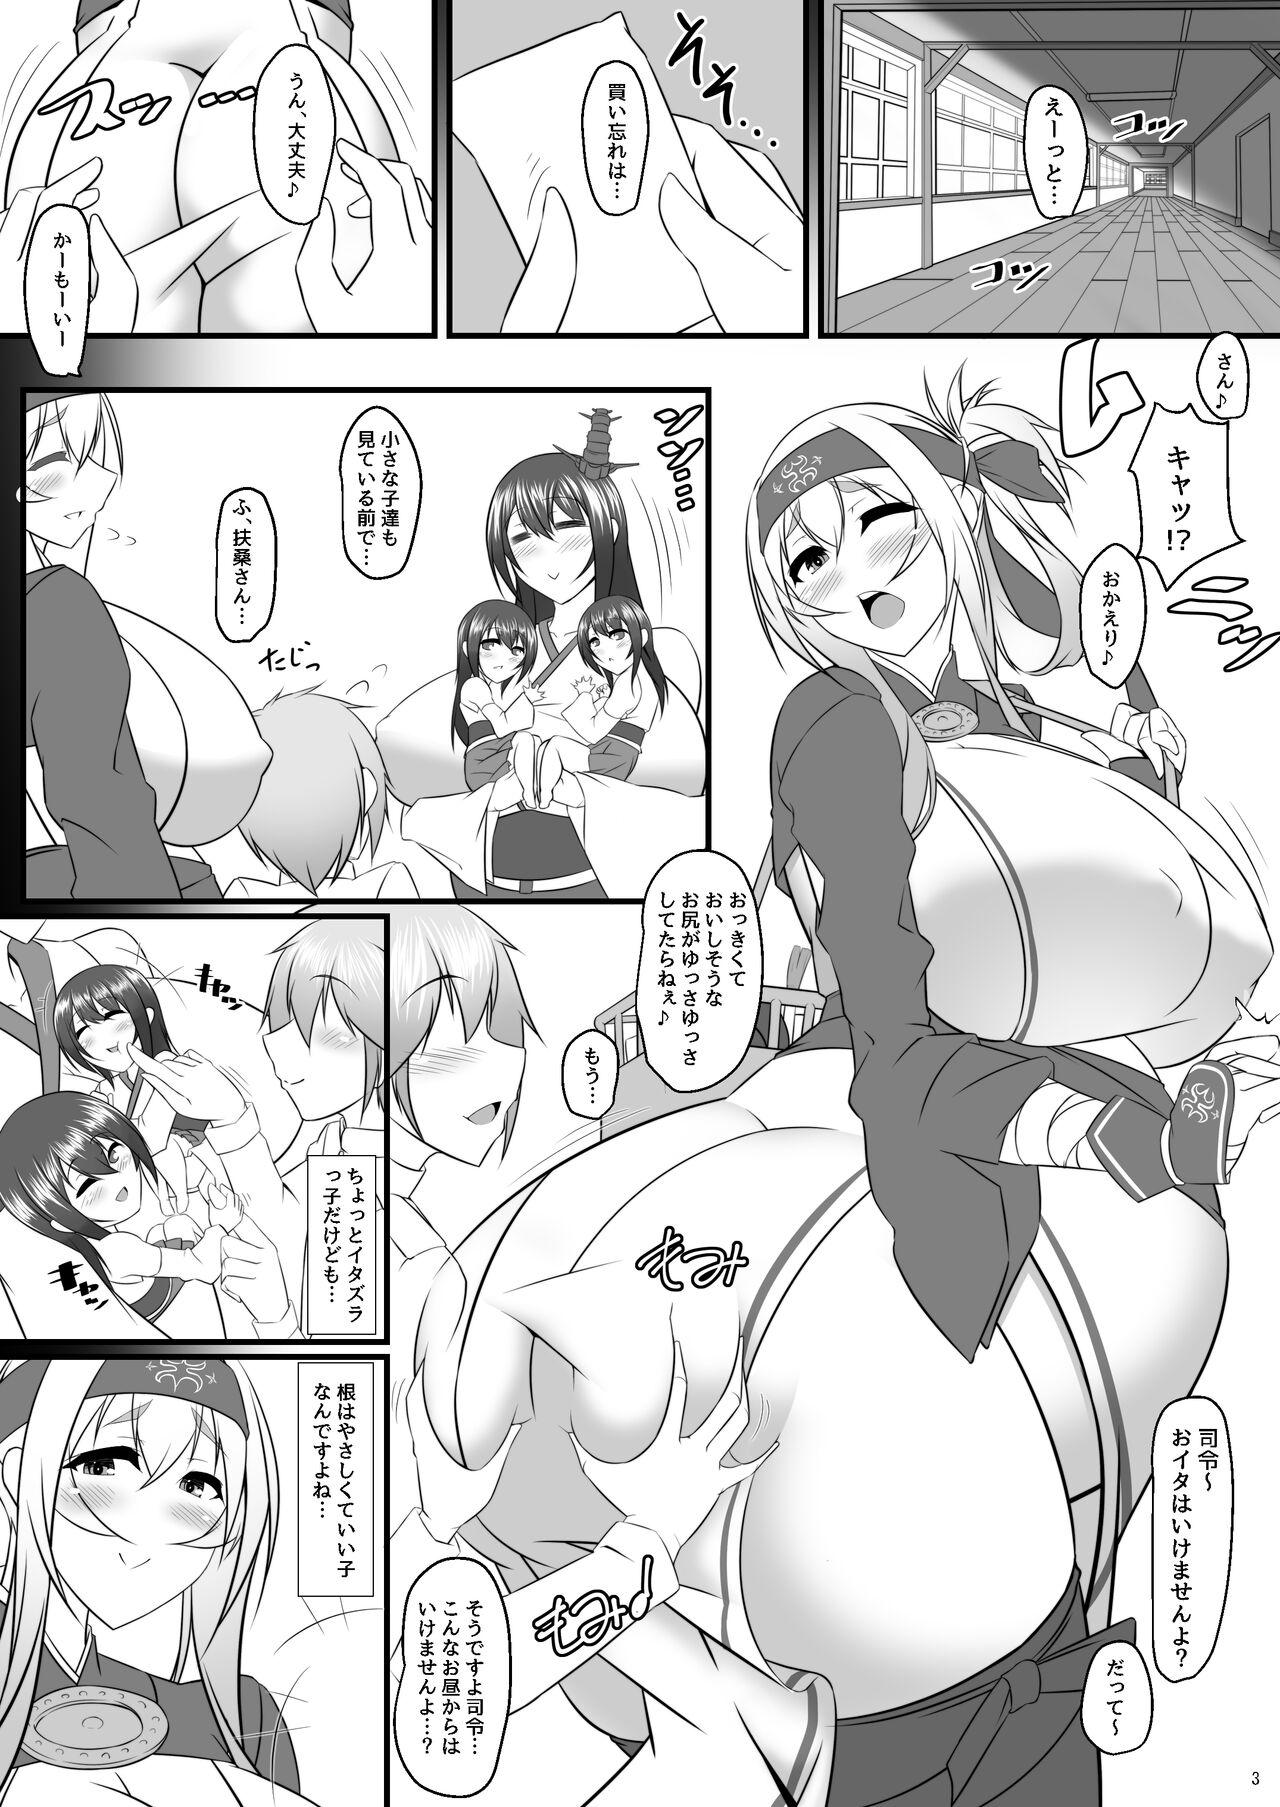 Gloryholes Bote Colle 6 - Kantai collection Sexy Girl Sex - Picture 3